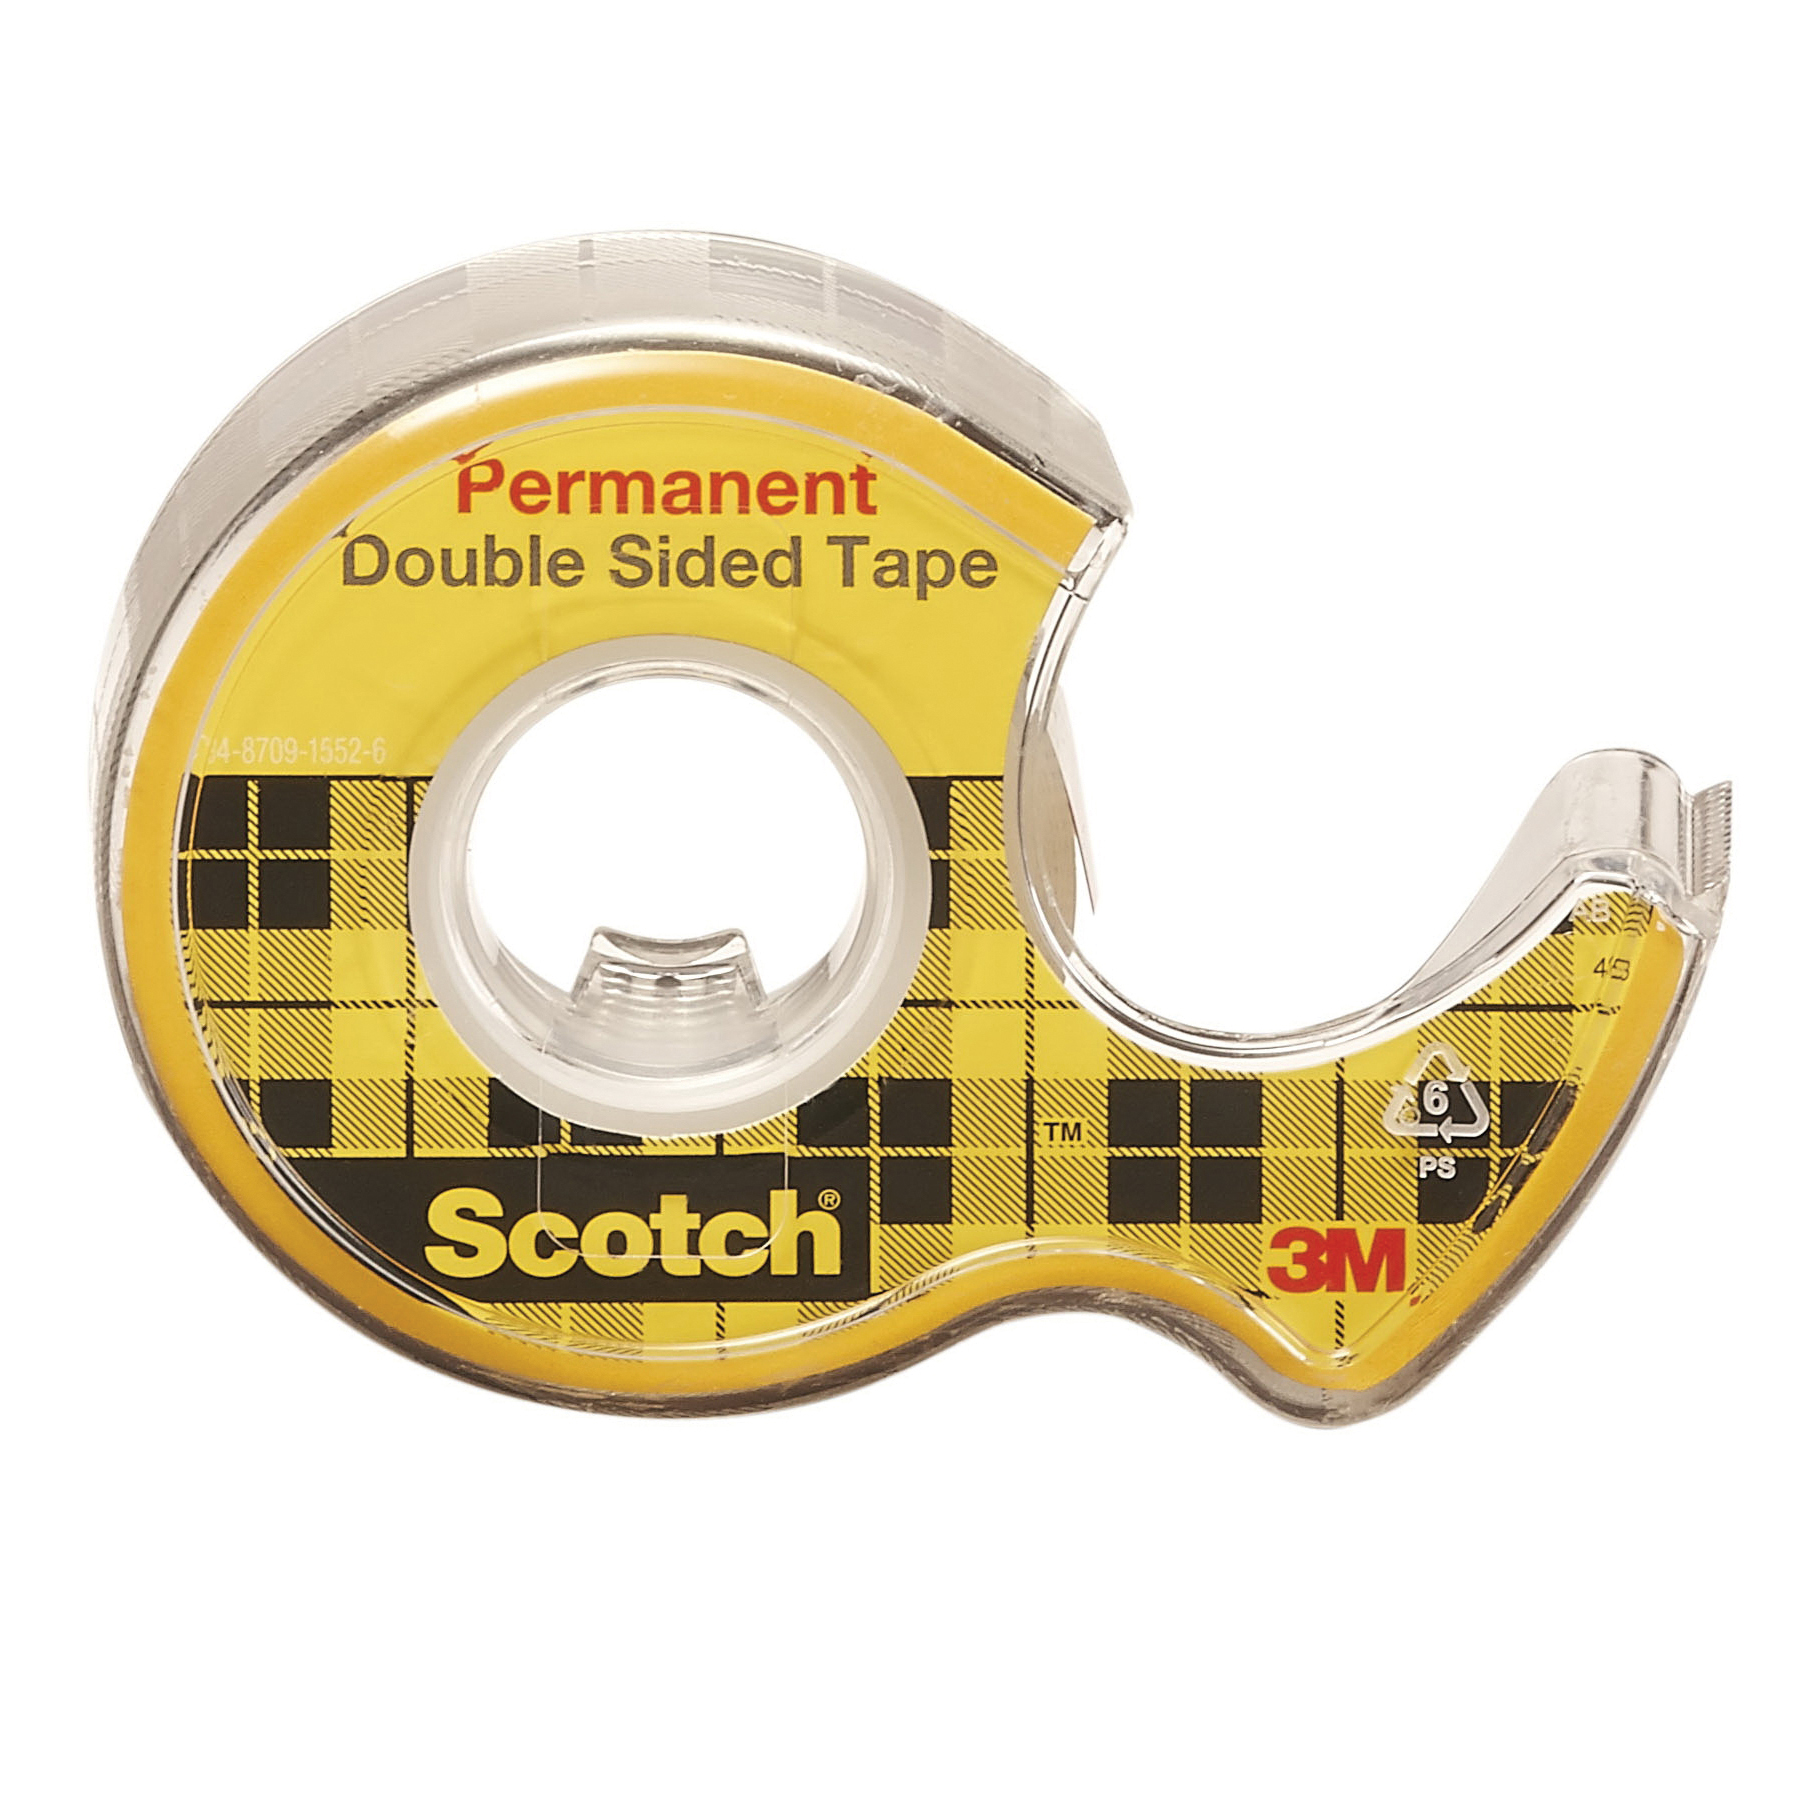 Removable/Readherable General Purpose Double-Sided Tape No.5000NS, NITOMS